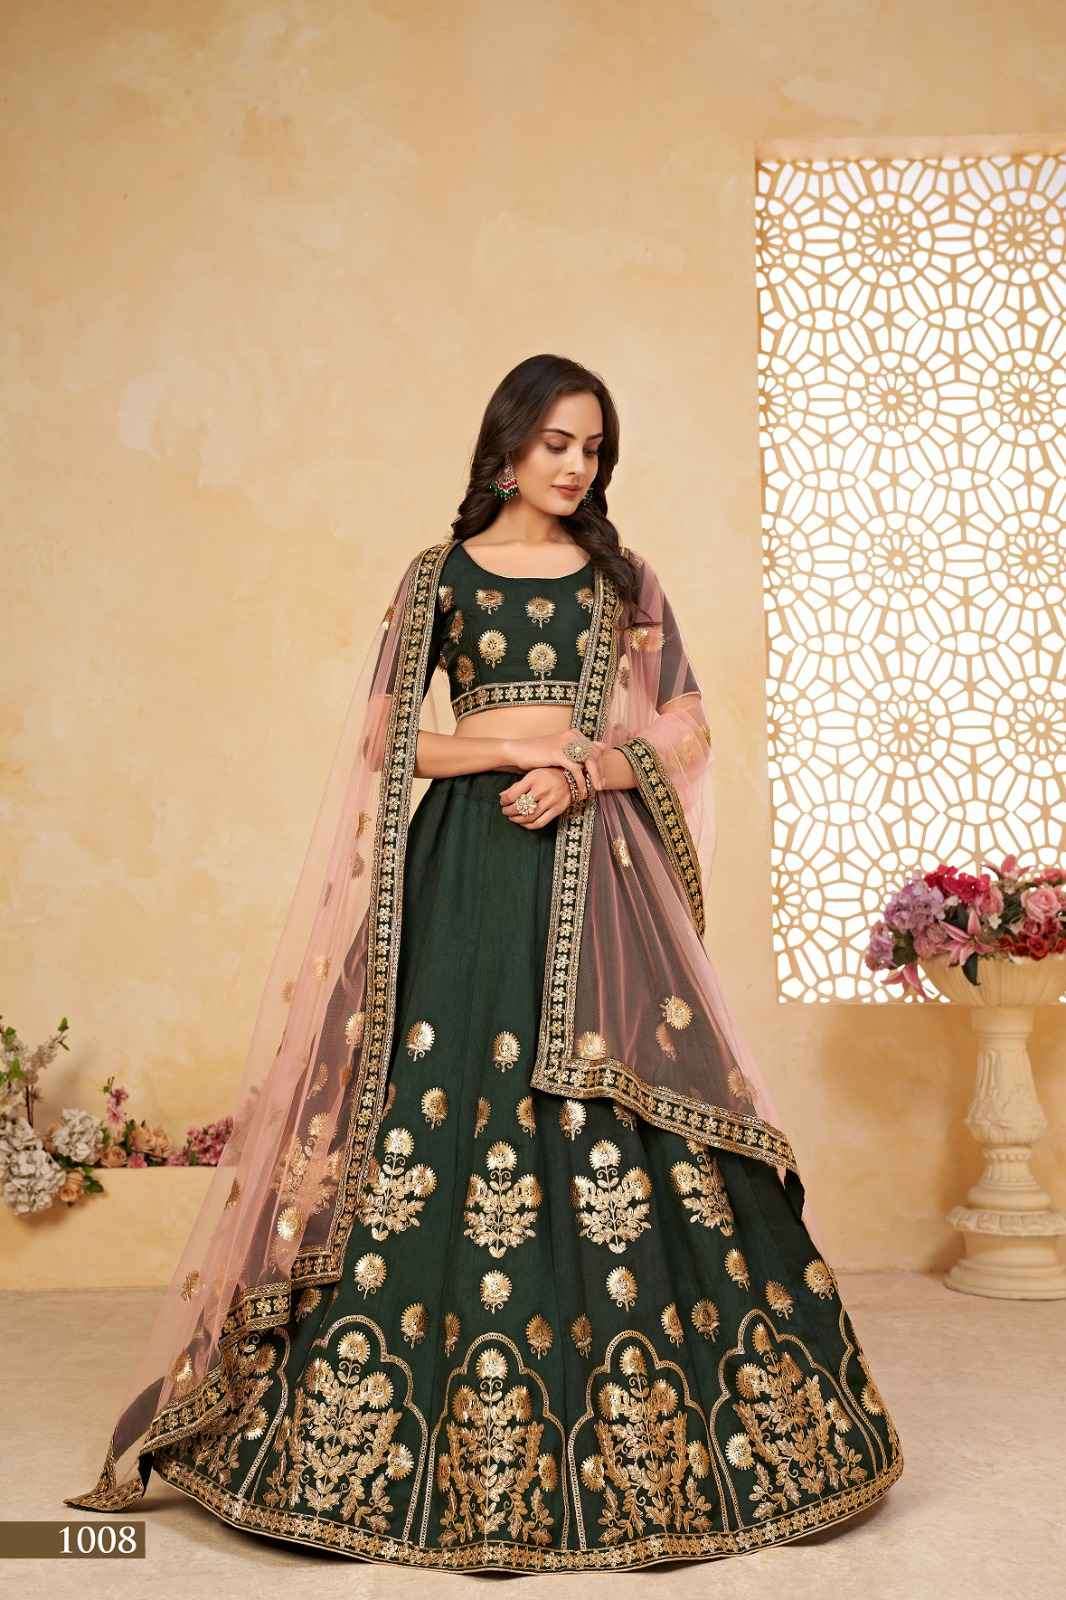 Gorgeous New Green Lehengas For Your Mehendi | Mehendi ceremony outfits,  Mehendi outfits, Indian wedding outfits